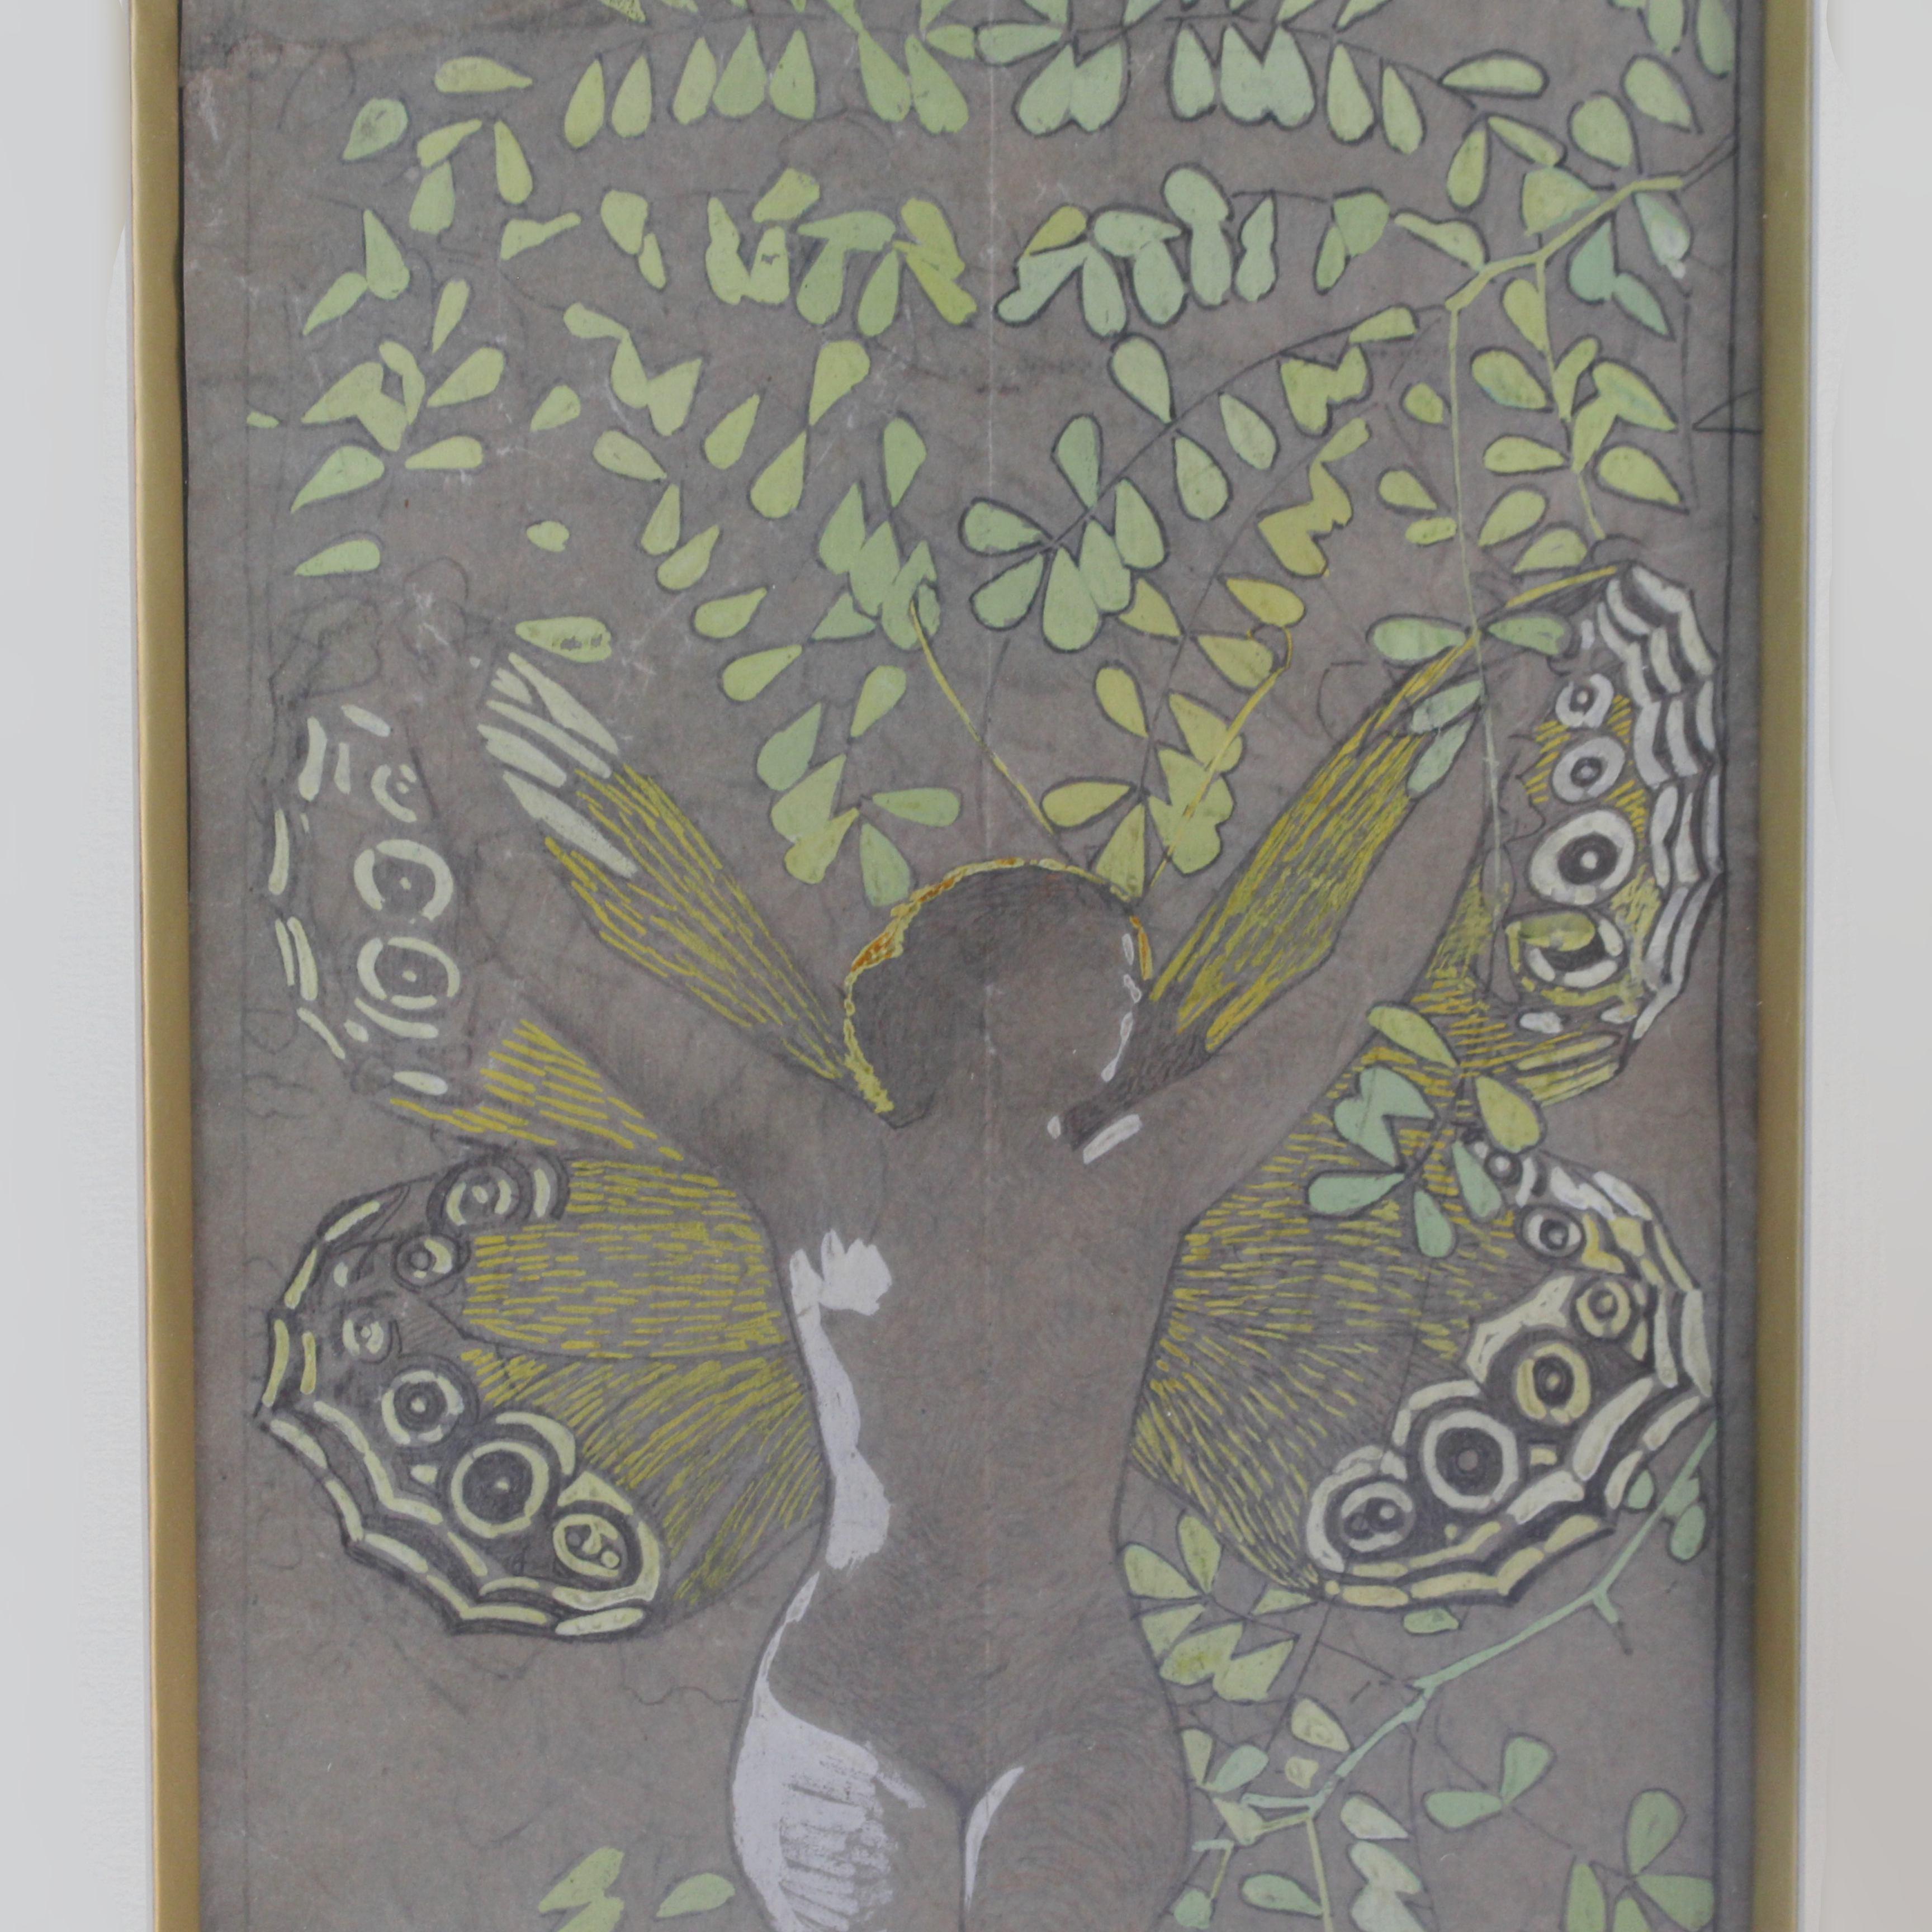 An Art Nouveau picture of a butterfly woman rising up. Pencil and gouache on paper. Signed with monogram to bottom left.

Artist: David Dellepiane (1866-1932).

David Dellepiane was born in Genoa Italy. He became a successful artist at an early